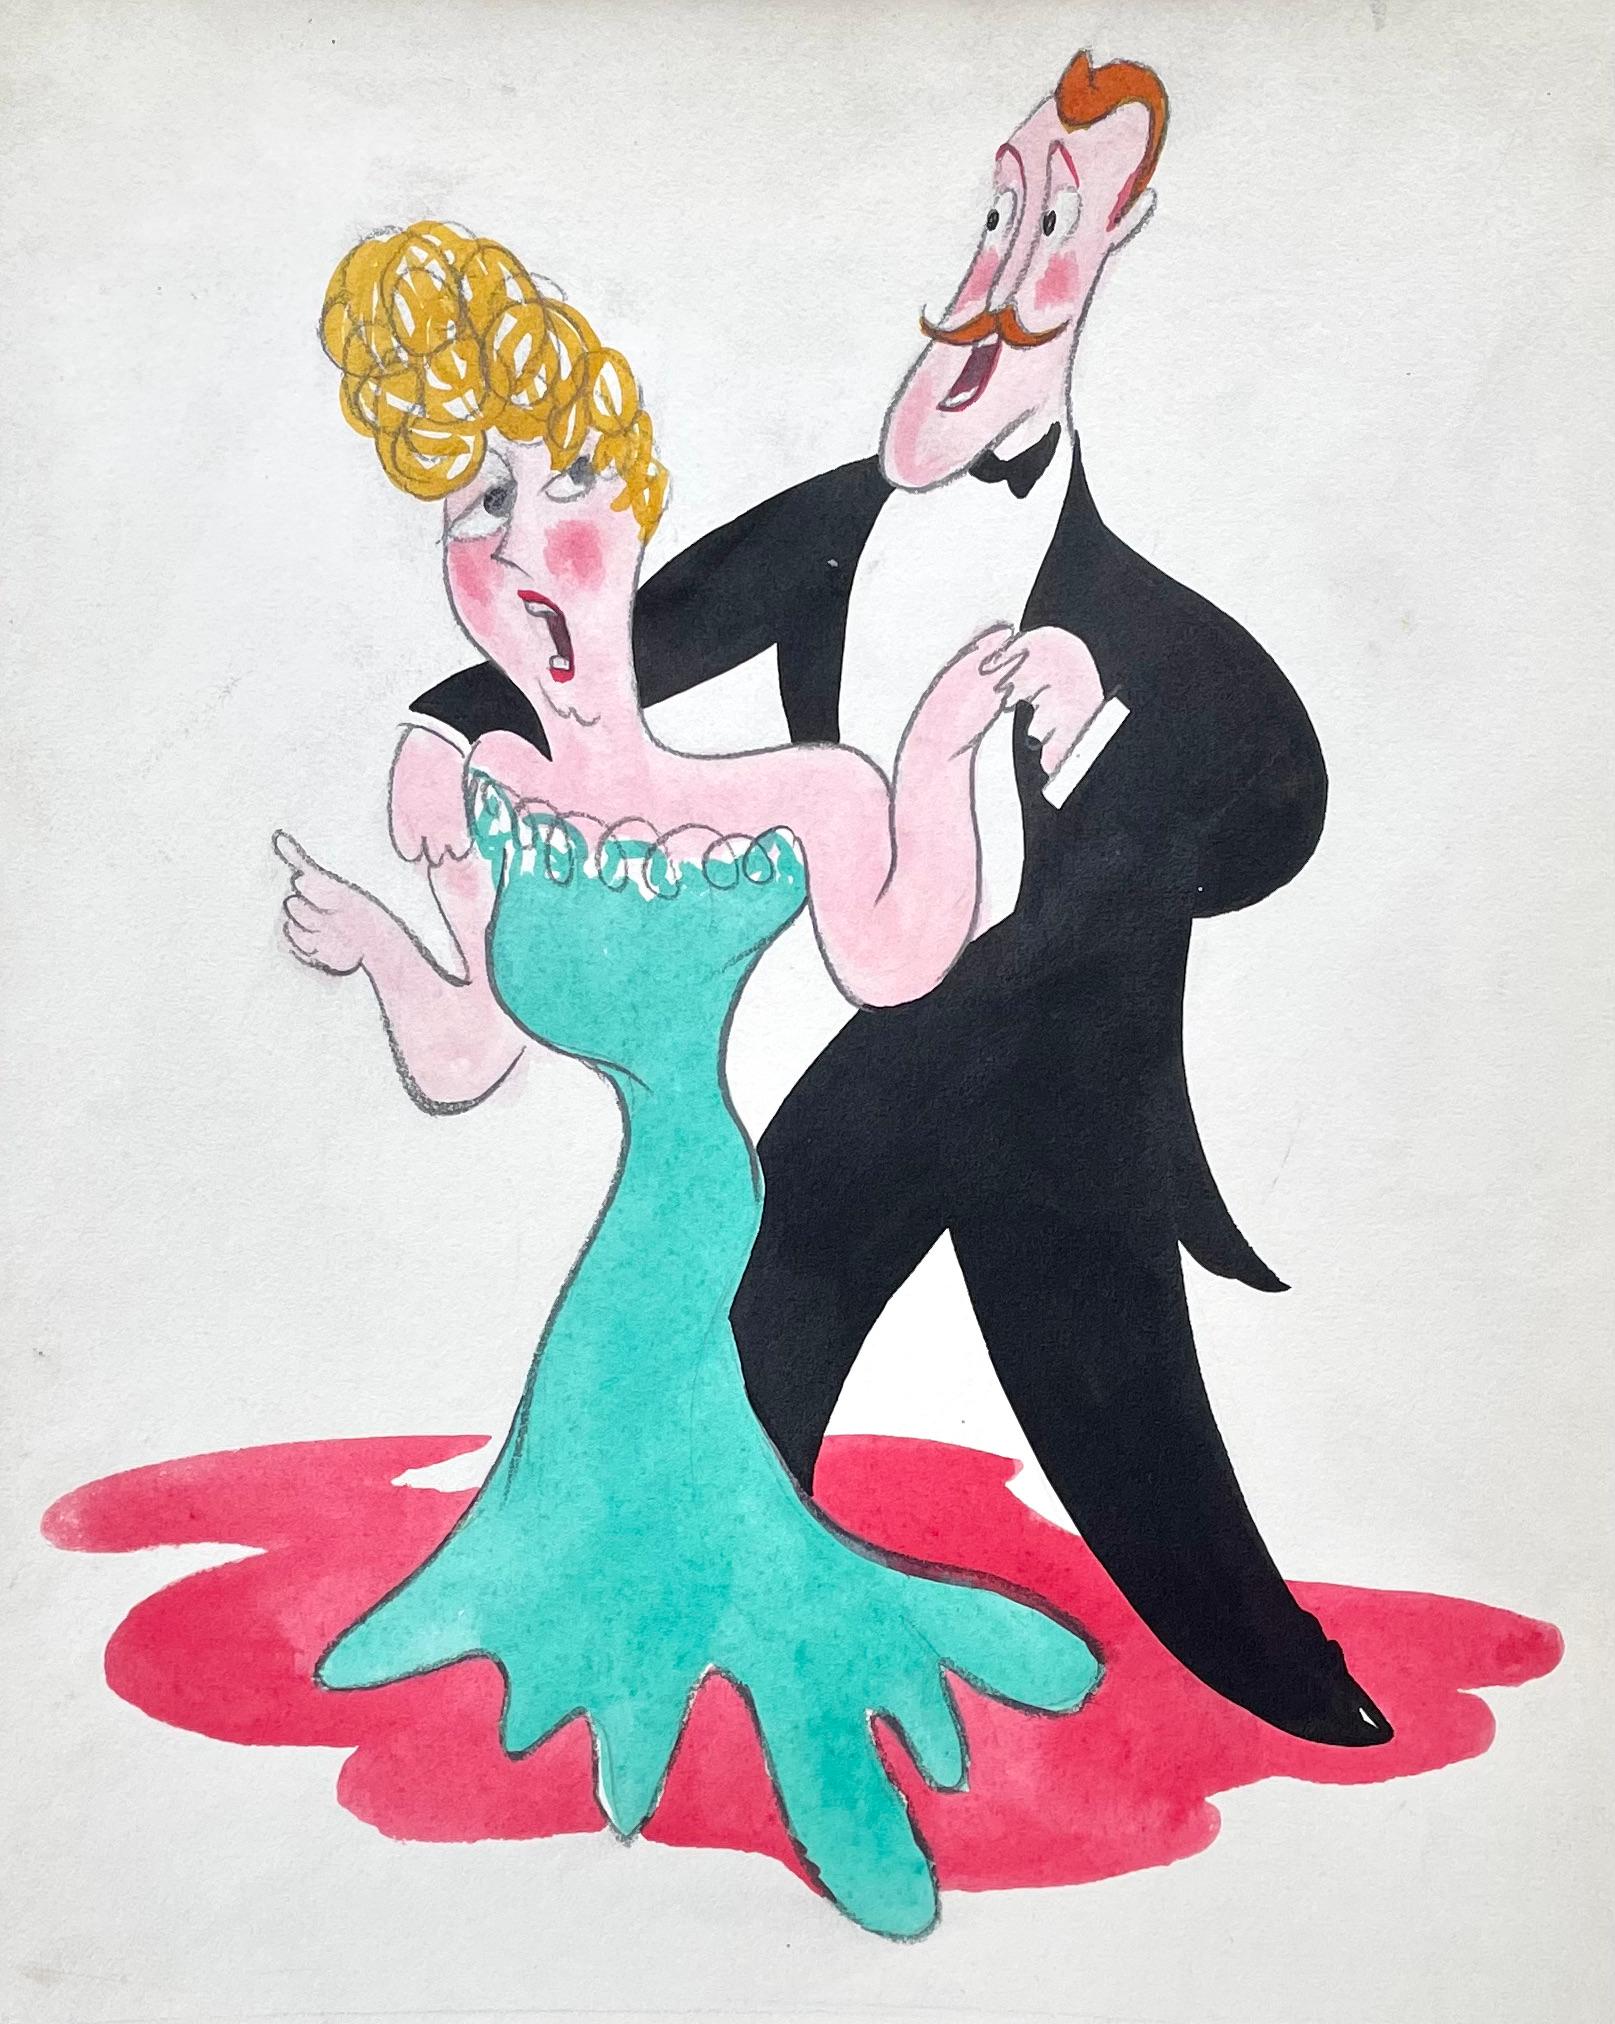 The Duet - A 1930s Theatrical Illustration by British artist John Dronsfield